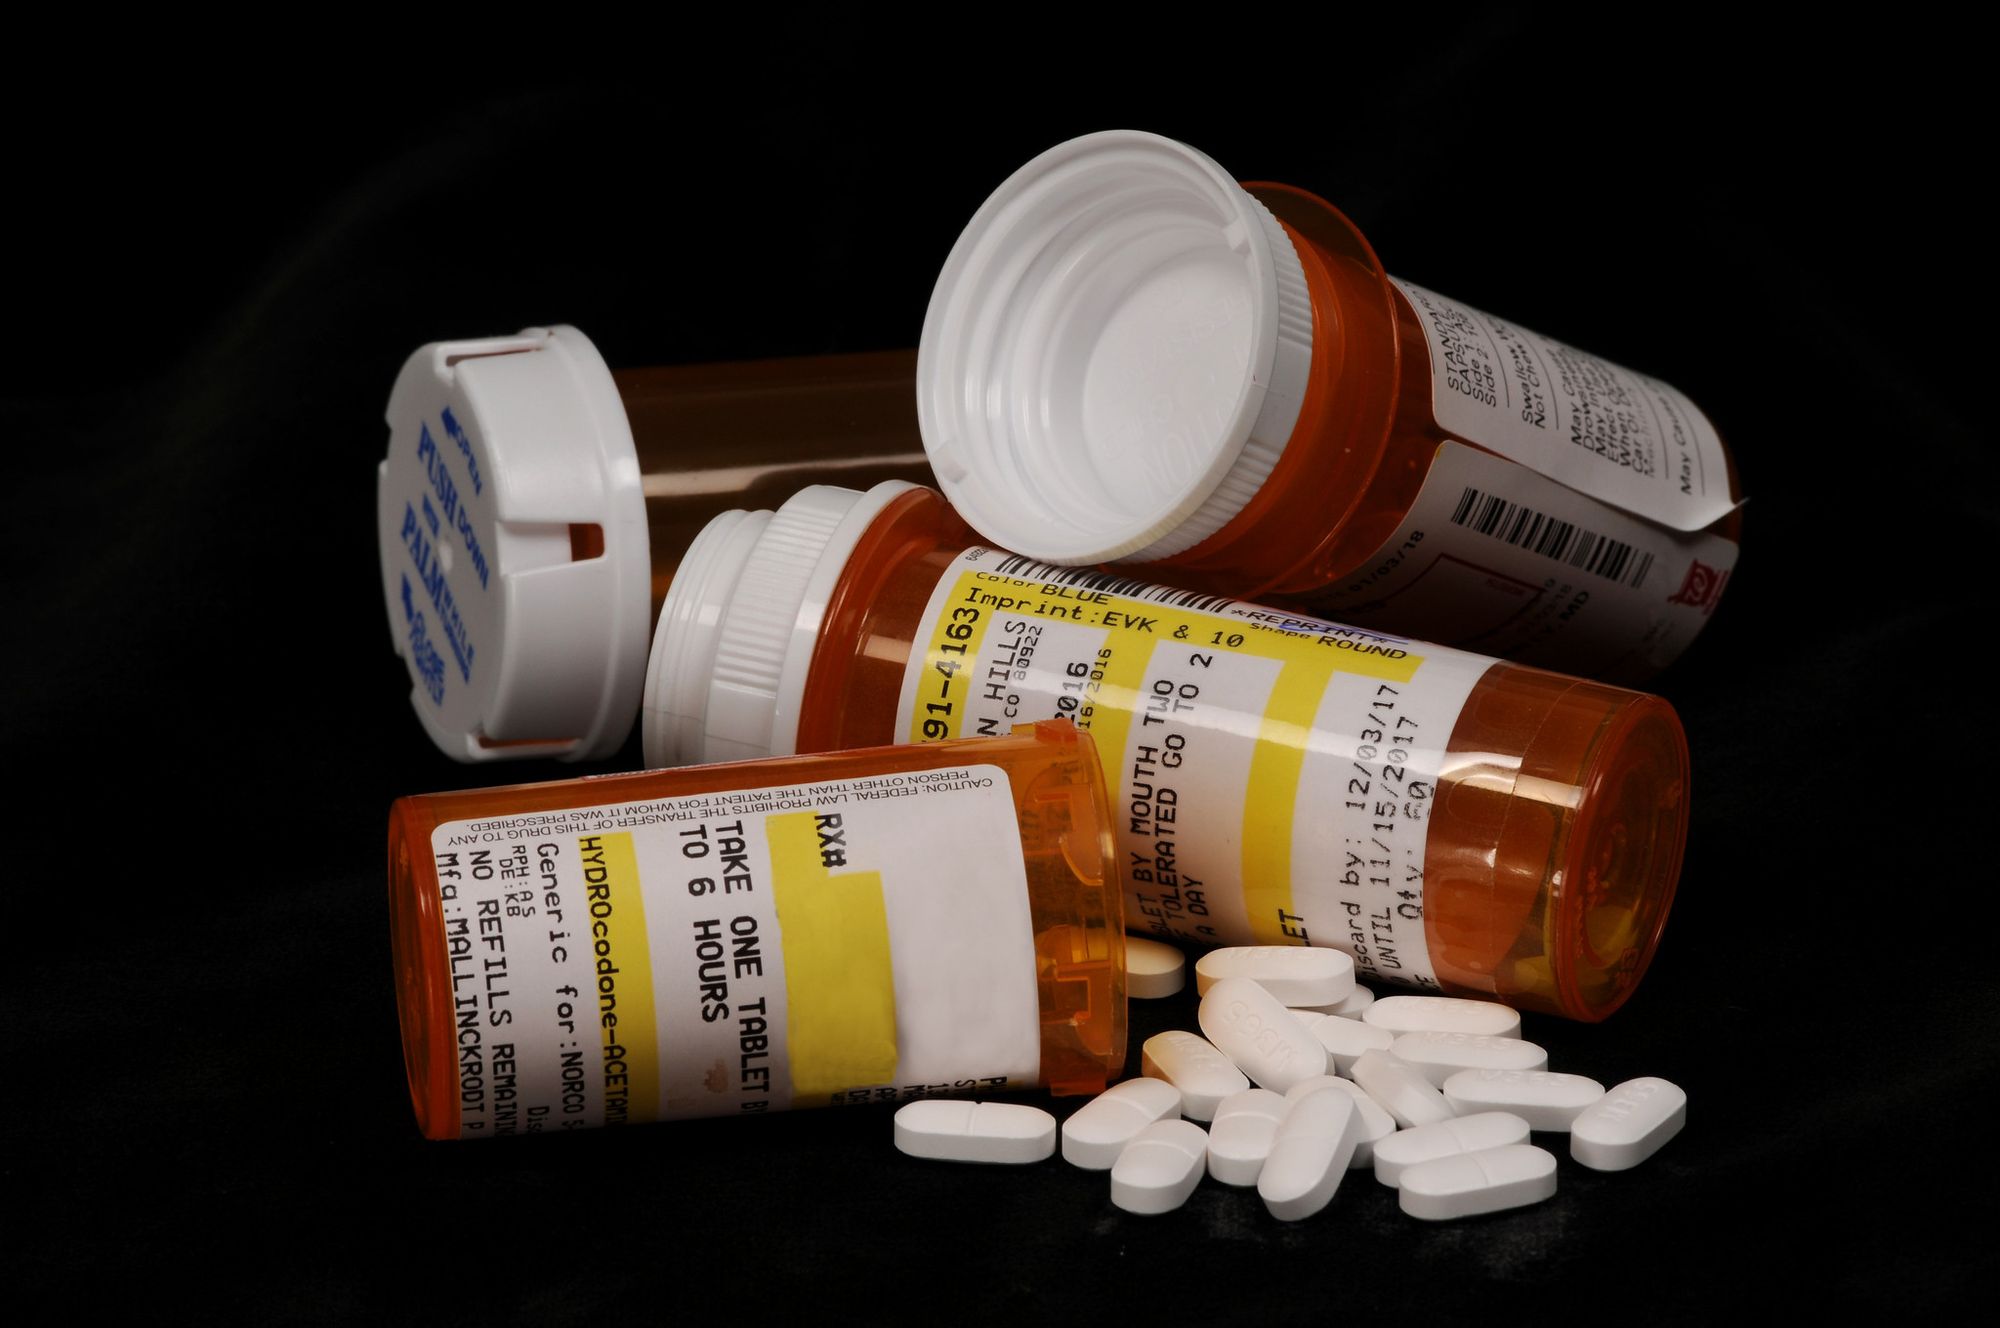                               Opioid use disorder – Crisis, Addiction and Impact on the Brain                             
                              